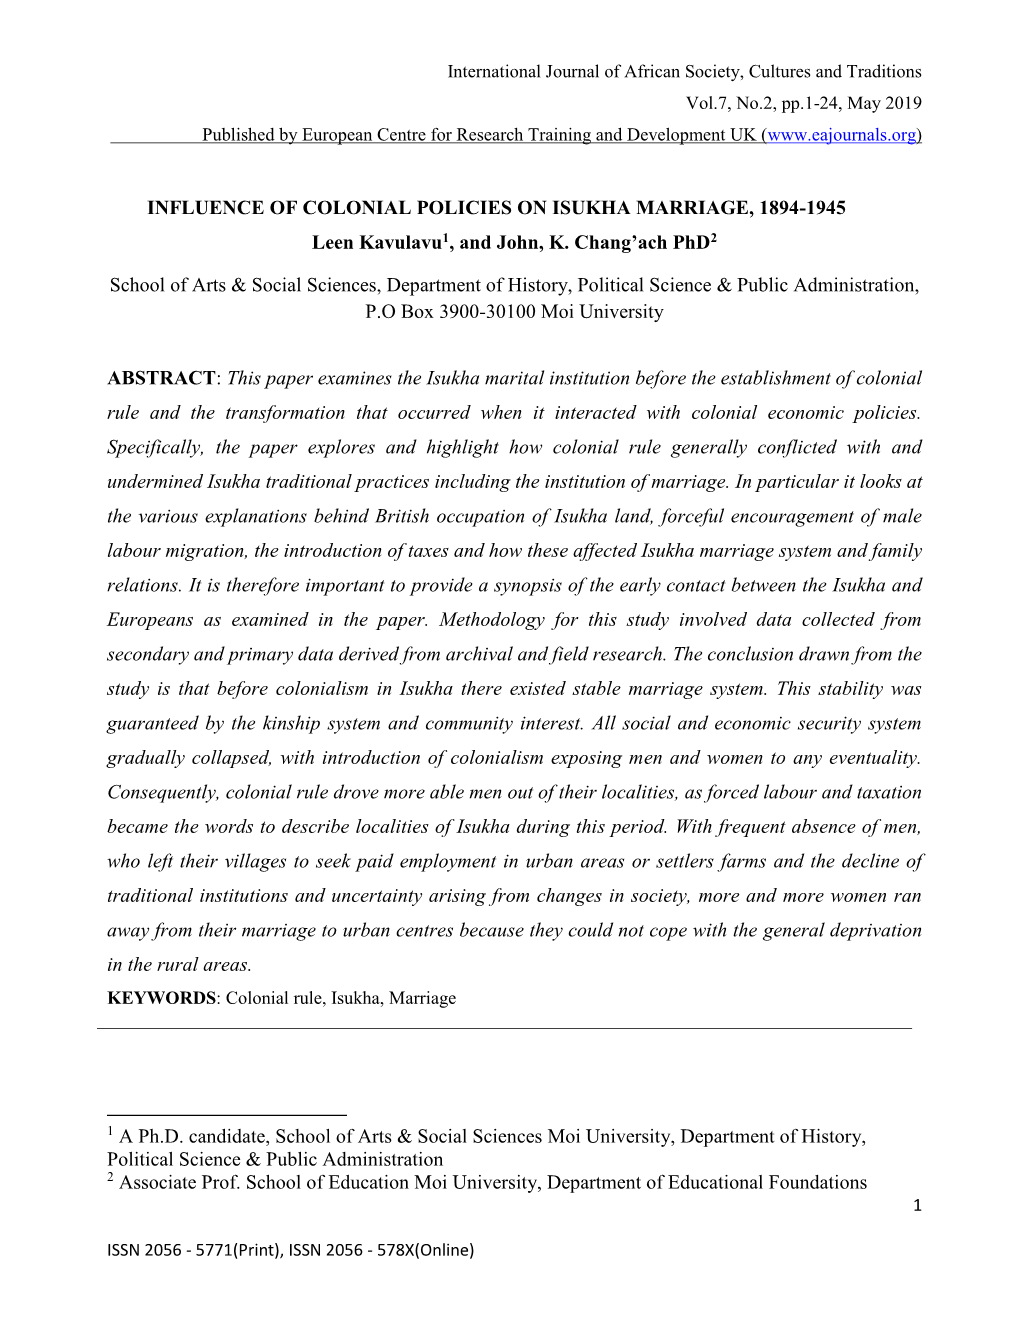 INFLUENCE of COLONIAL POLICIES on ISUKHA MARRIAGE, 1894-1945 Leen Kavulavu1, and John, K